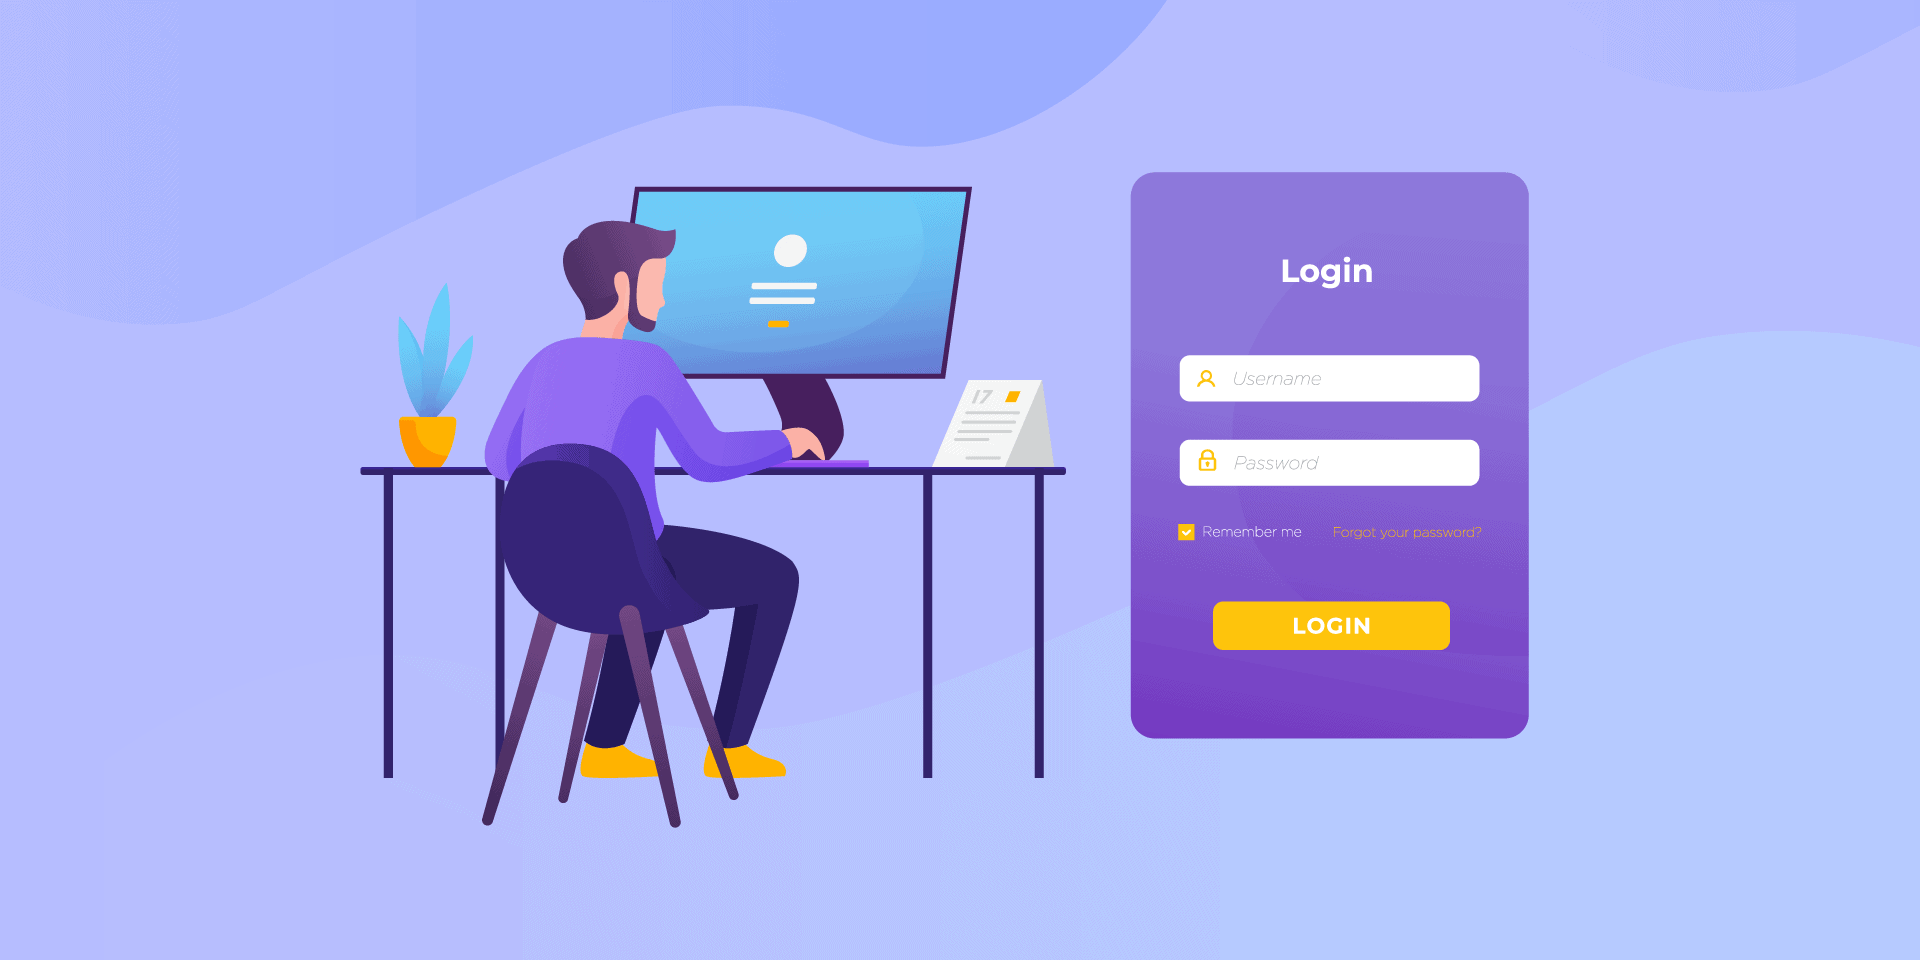 5 Best WordPress Login Page Plugins for bussiness sites